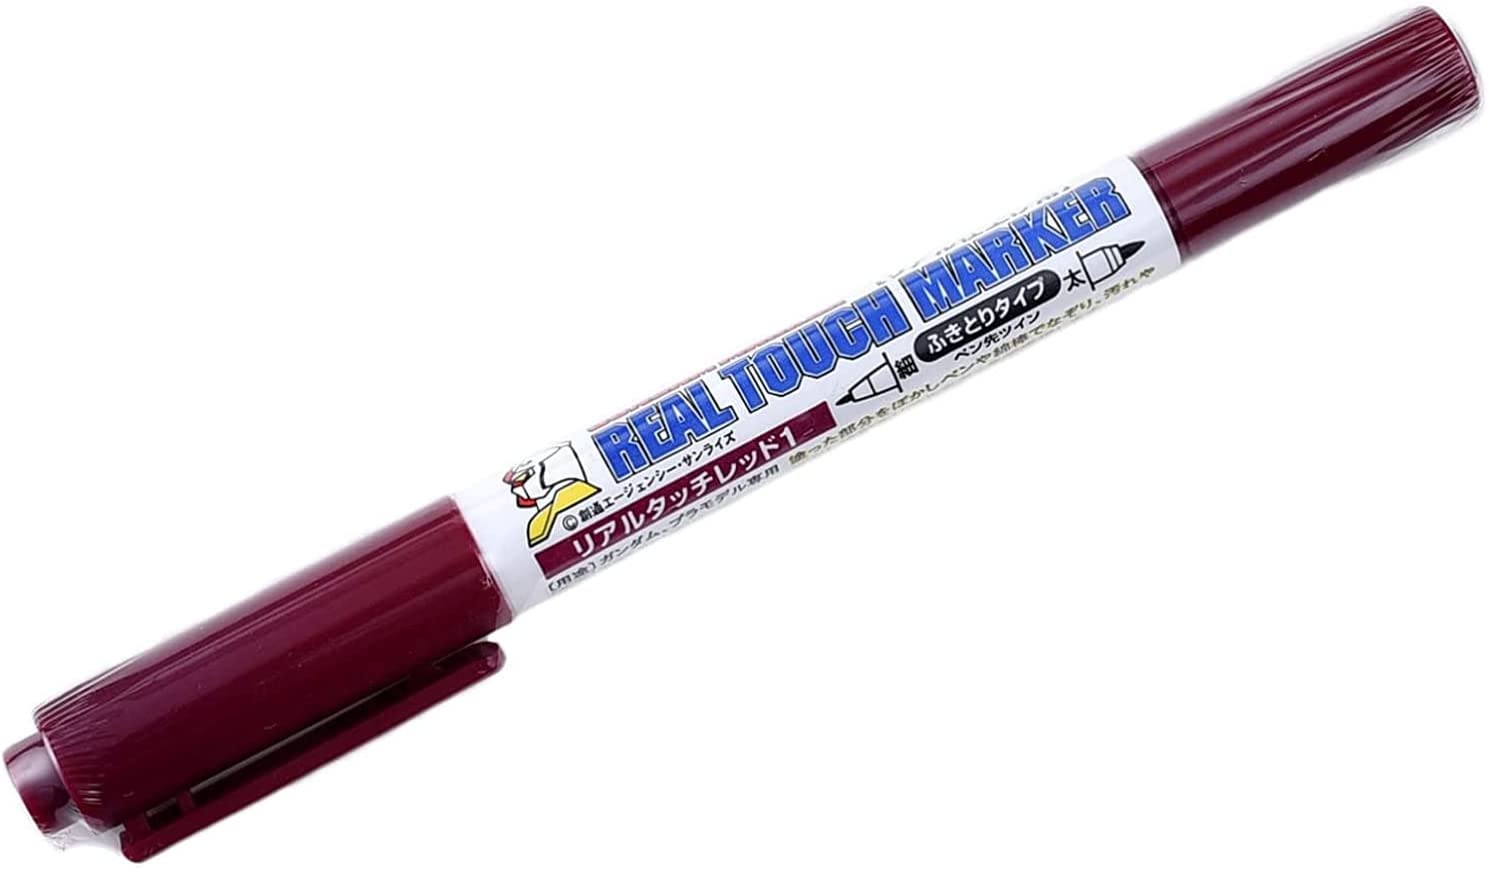 GM404 GSI Creos GM404 Gundam Marker, Real Touch Marker, Red 1, M